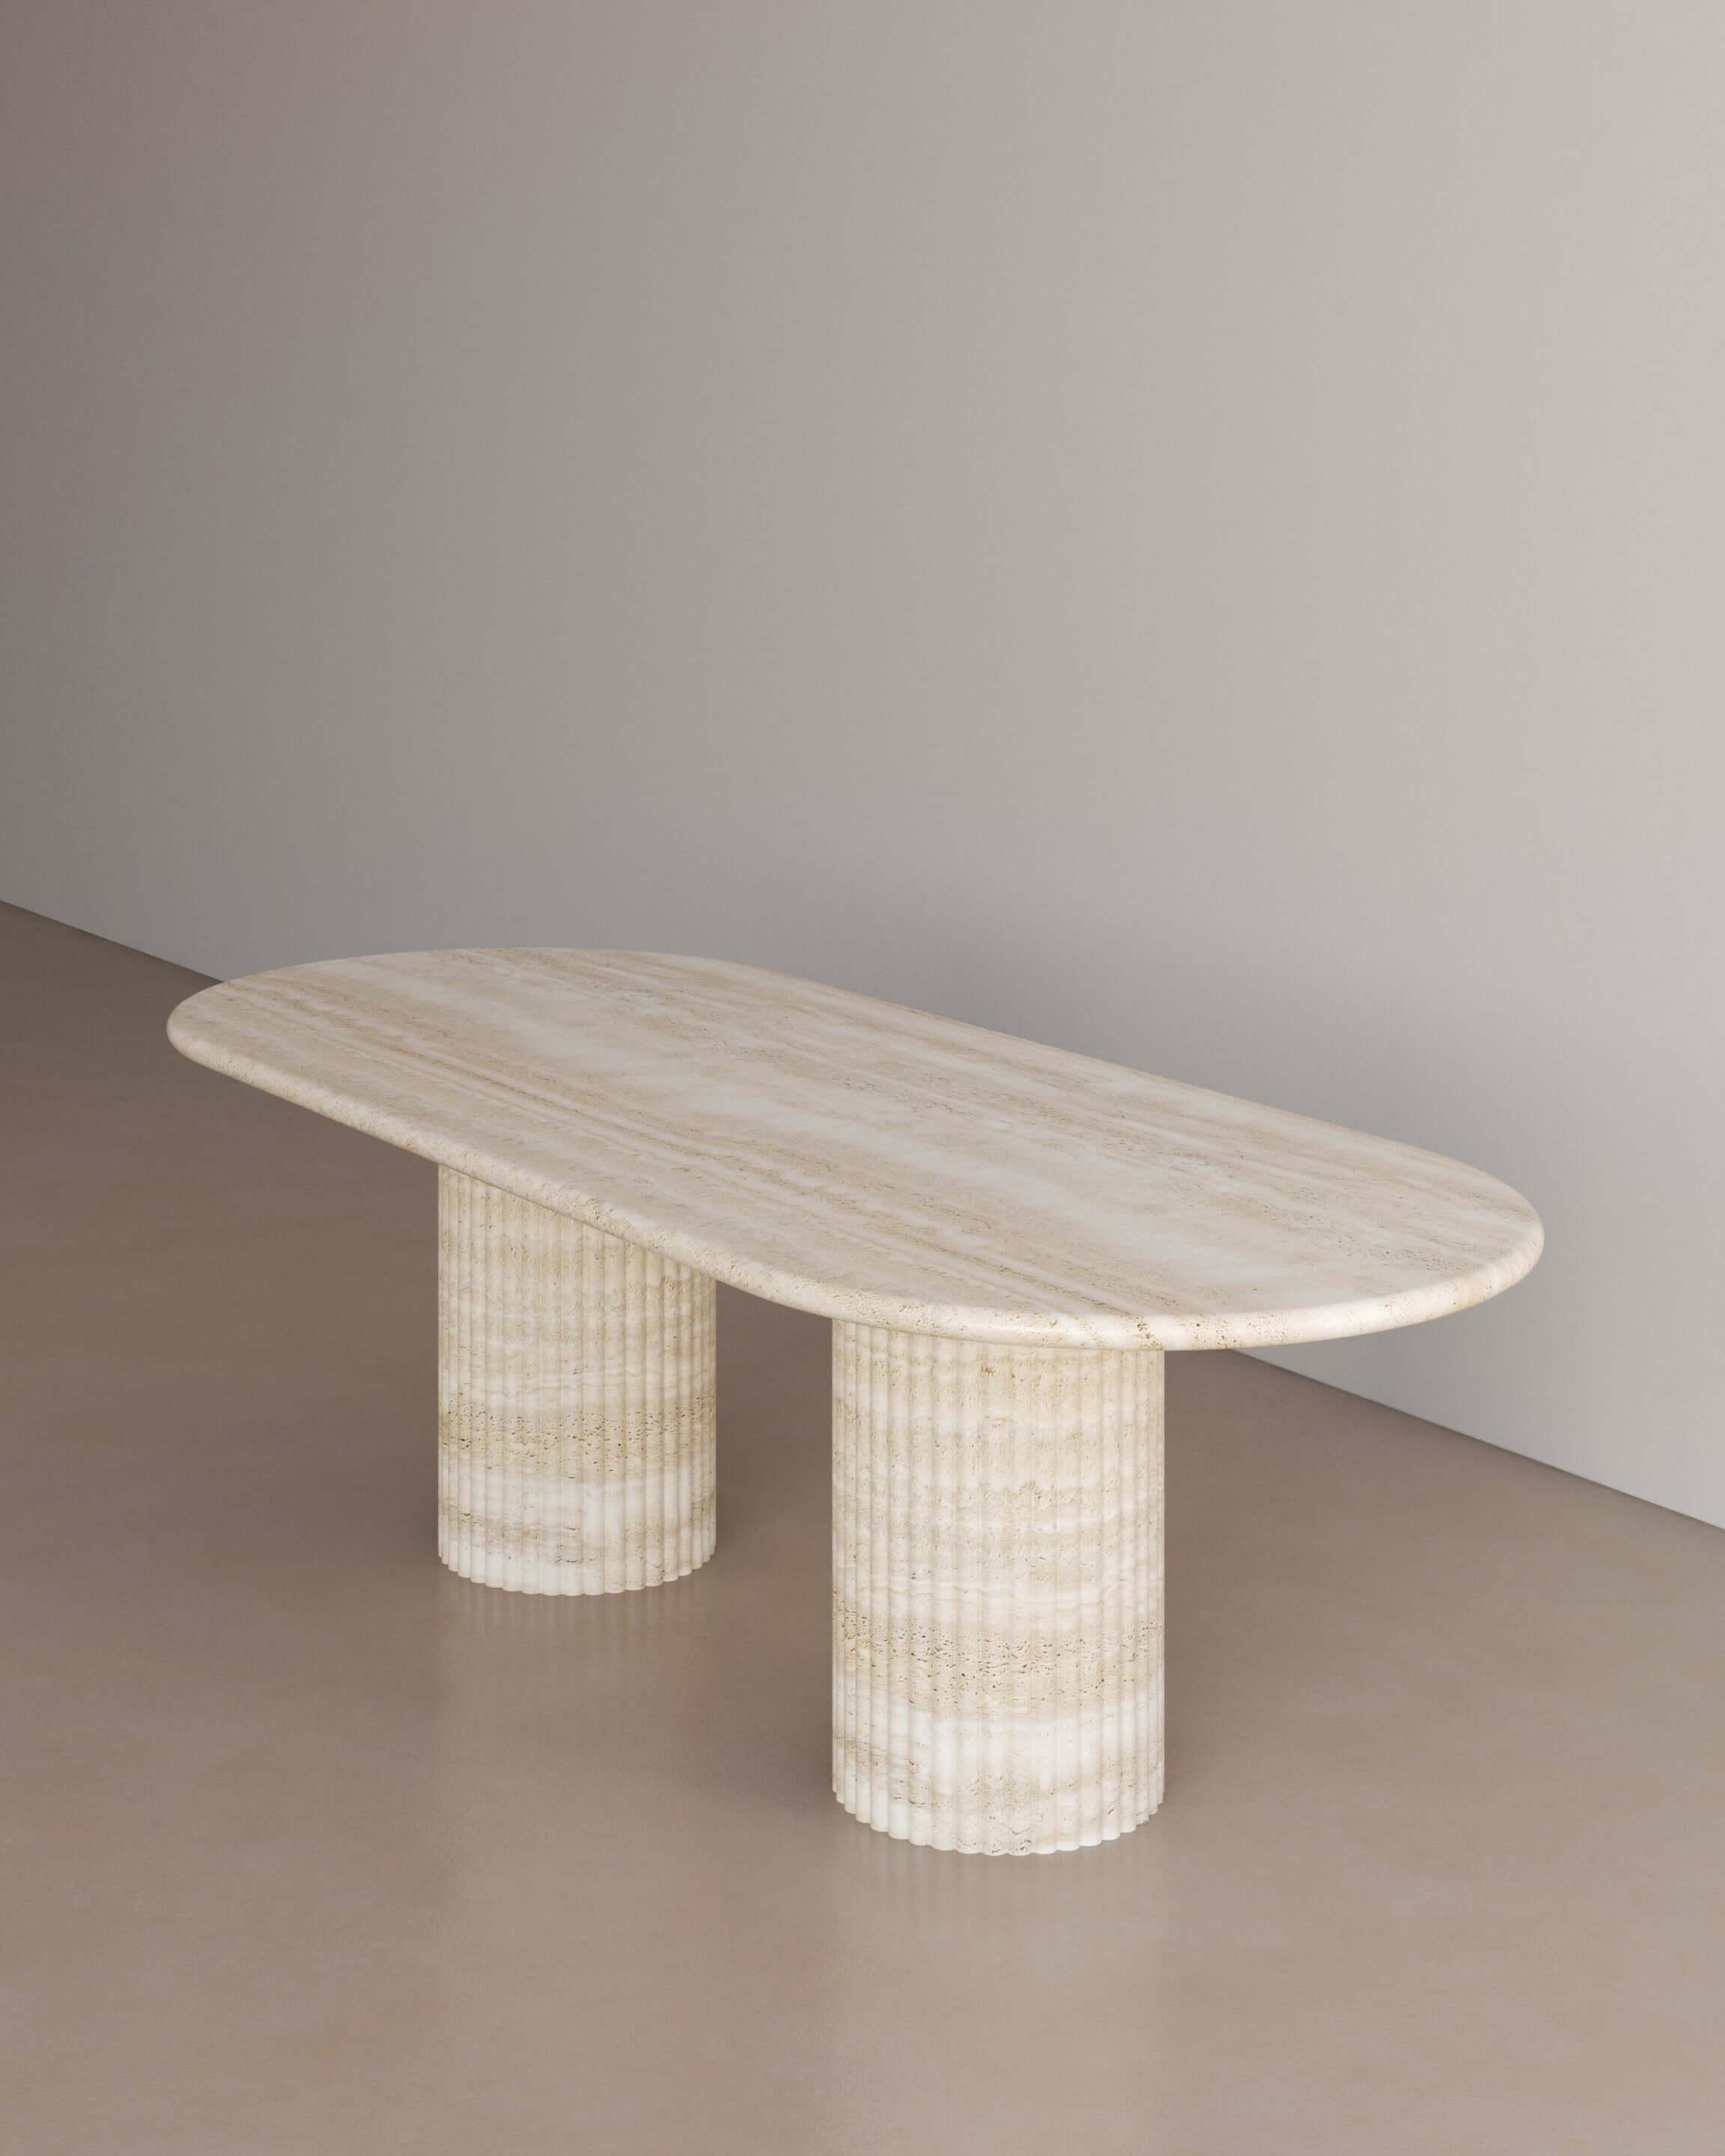 The Essentialist brings you The Antica Dining Table II in Nude Travertine. An oval table top resolved by smooth bullnose edges rests on two supporting pillars. Architectural form is refined by artistic expression echoing Roman culture. This table,